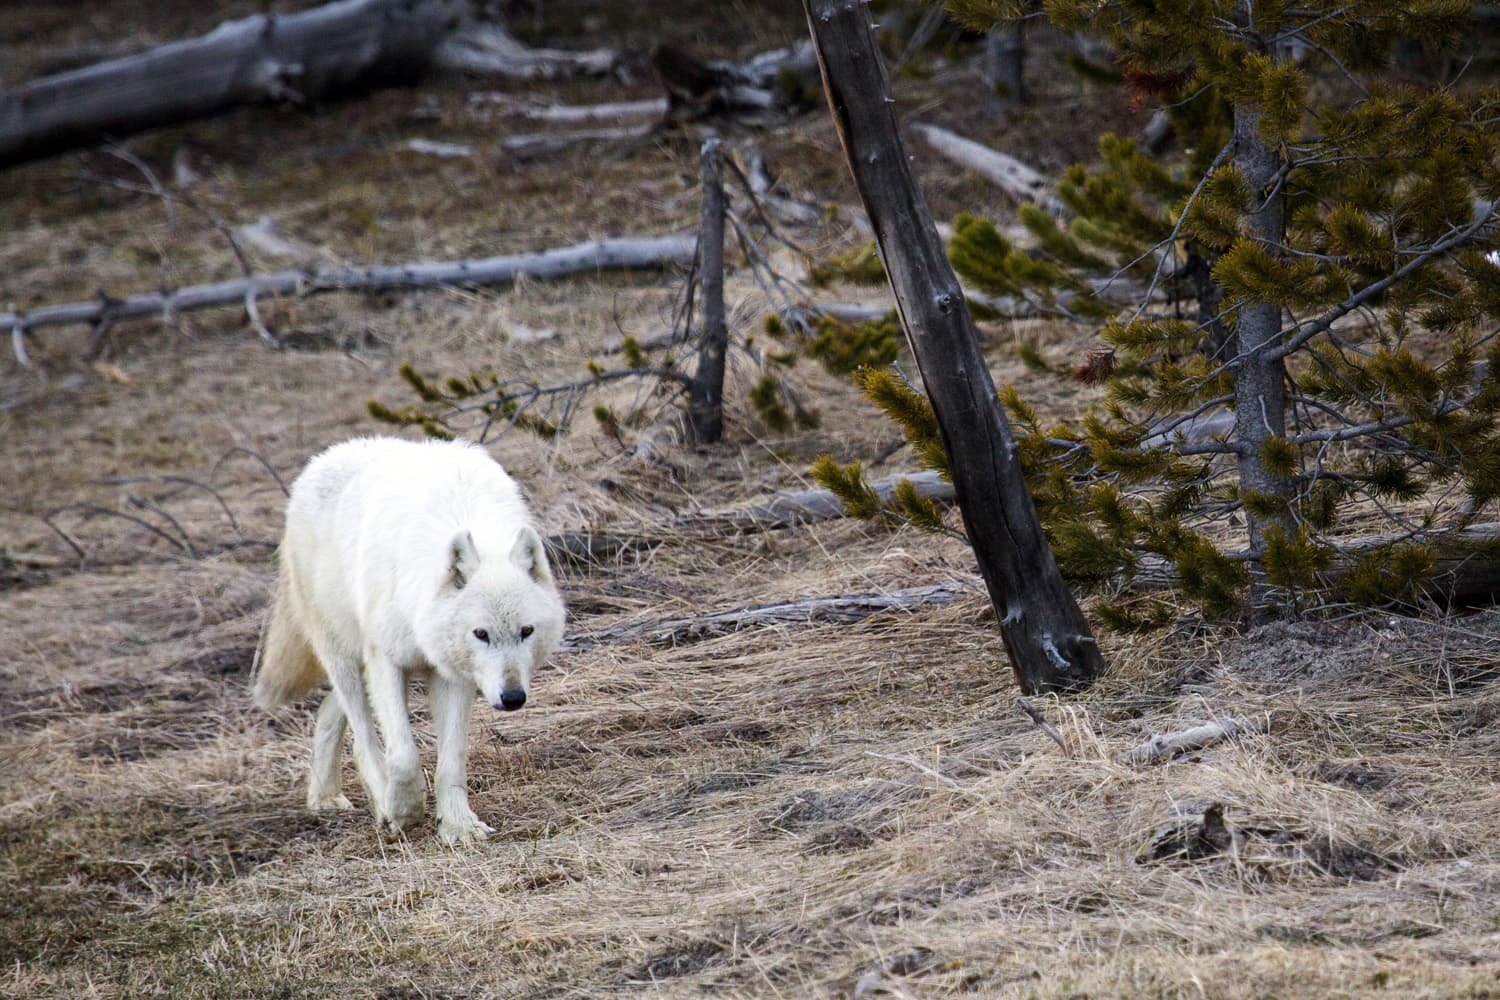 In this April 6, 2016, file photo provided by the Yellowstone National Park Service, a white wolf walks in Yellowstone National Park, in Wyo. (Neal Herbert/Yellowstone National Park via AP)